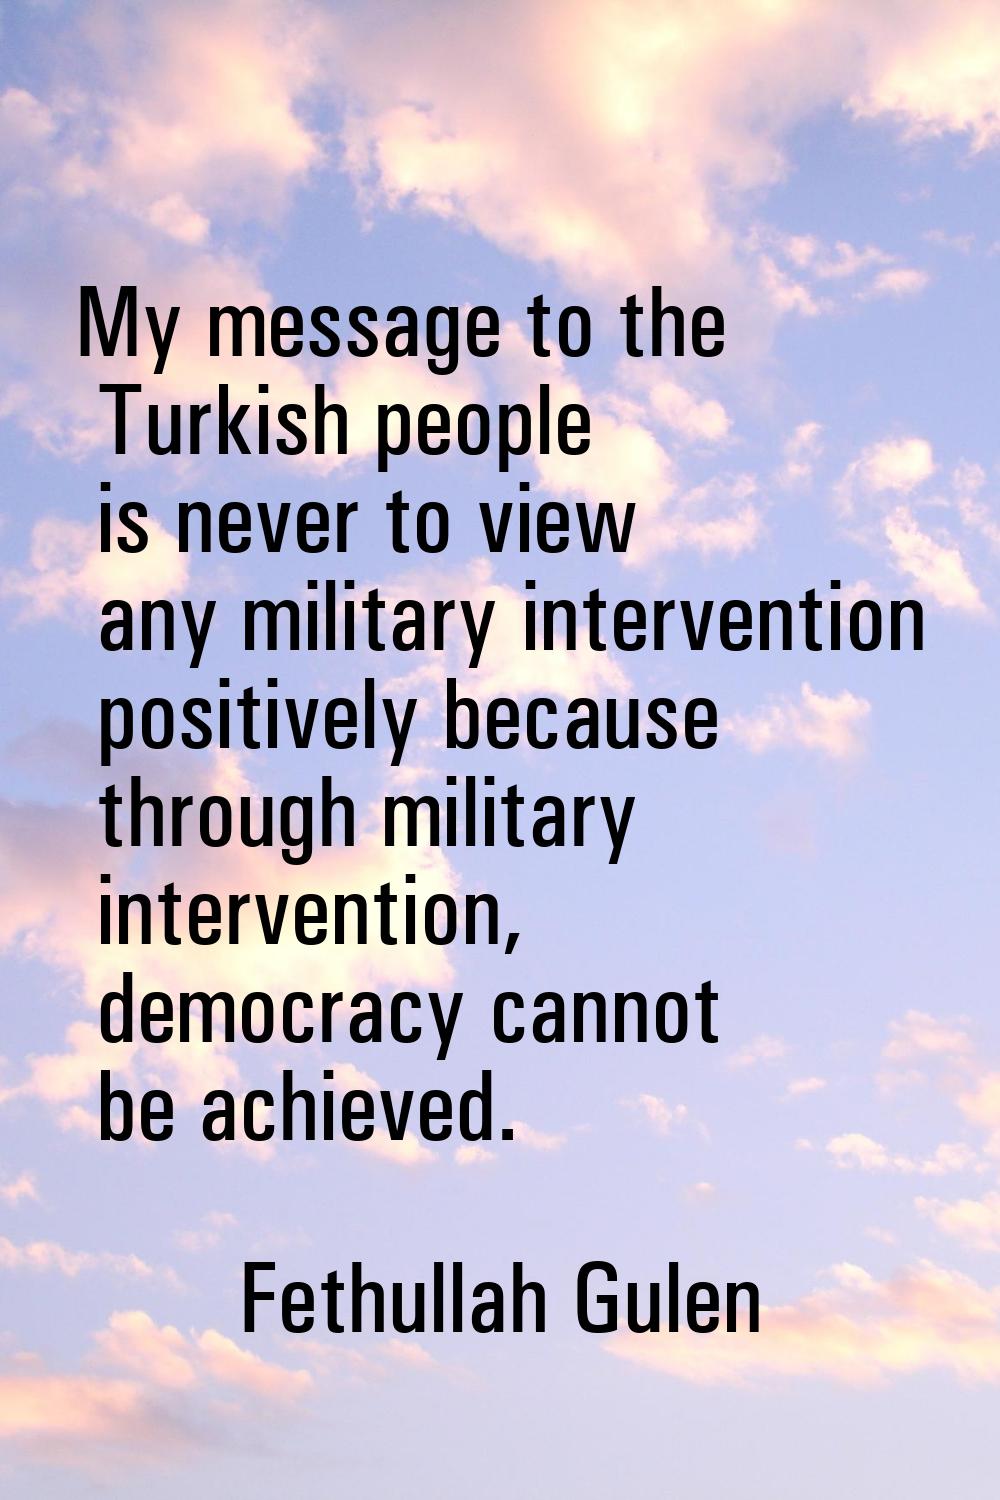 My message to the Turkish people is never to view any military intervention positively because thro